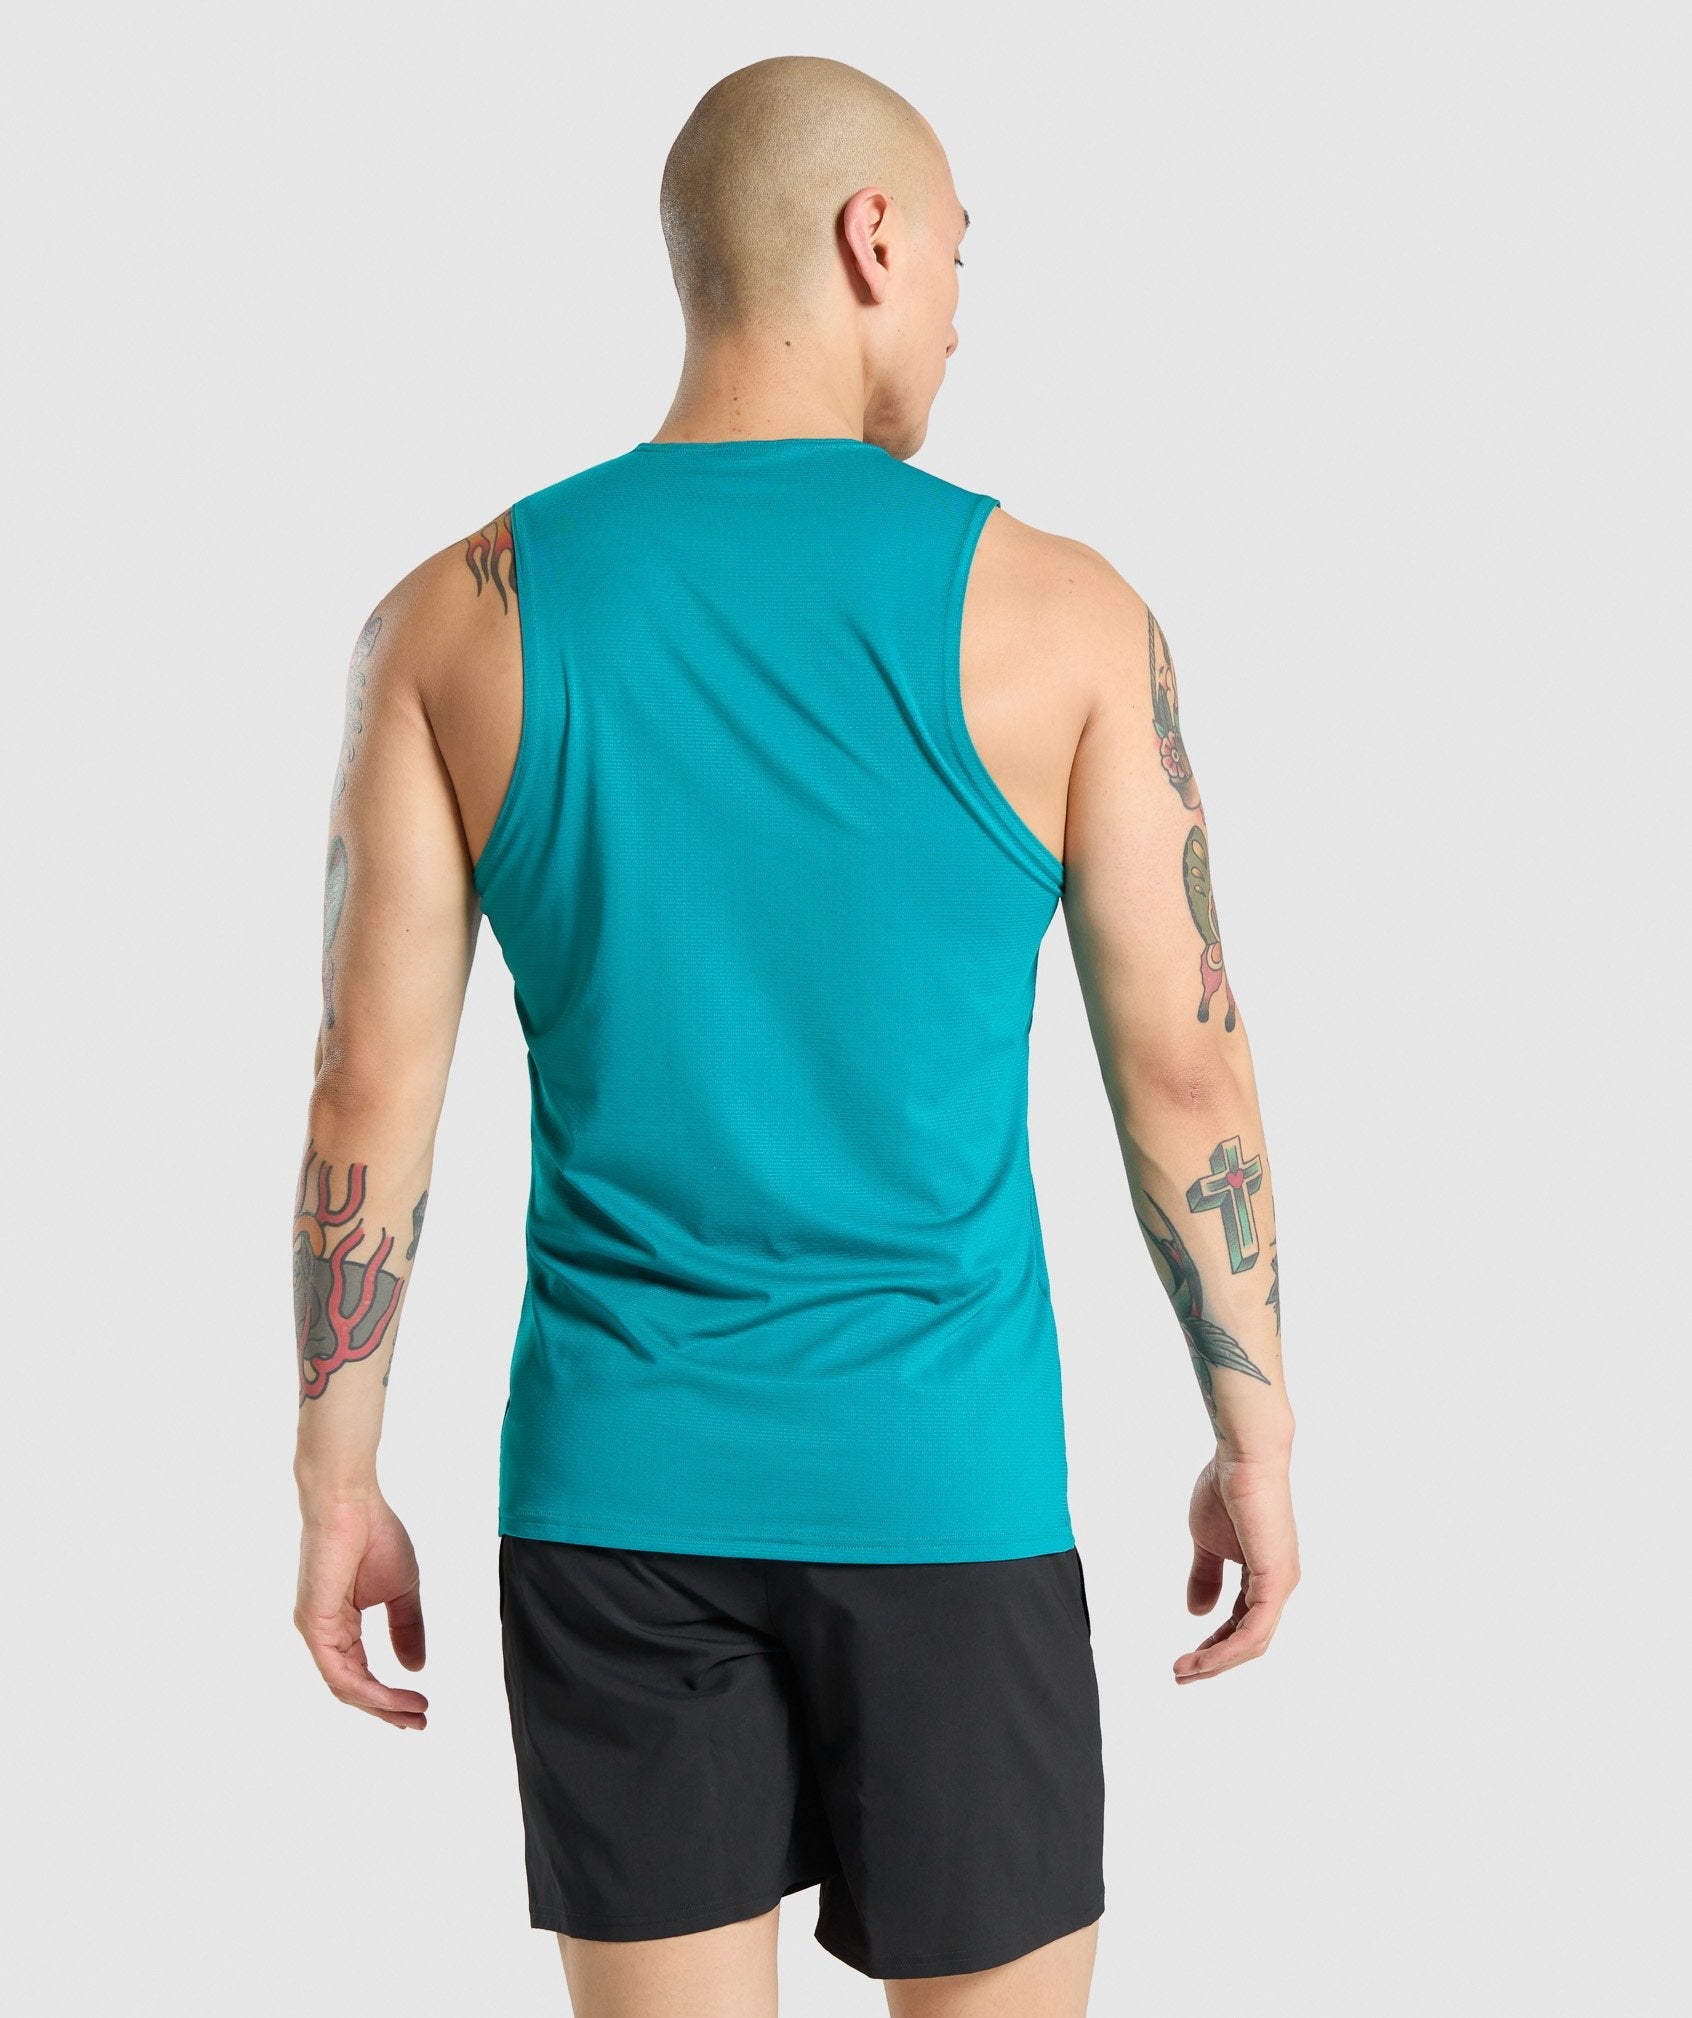 Arrival Tank in Teal - view 3